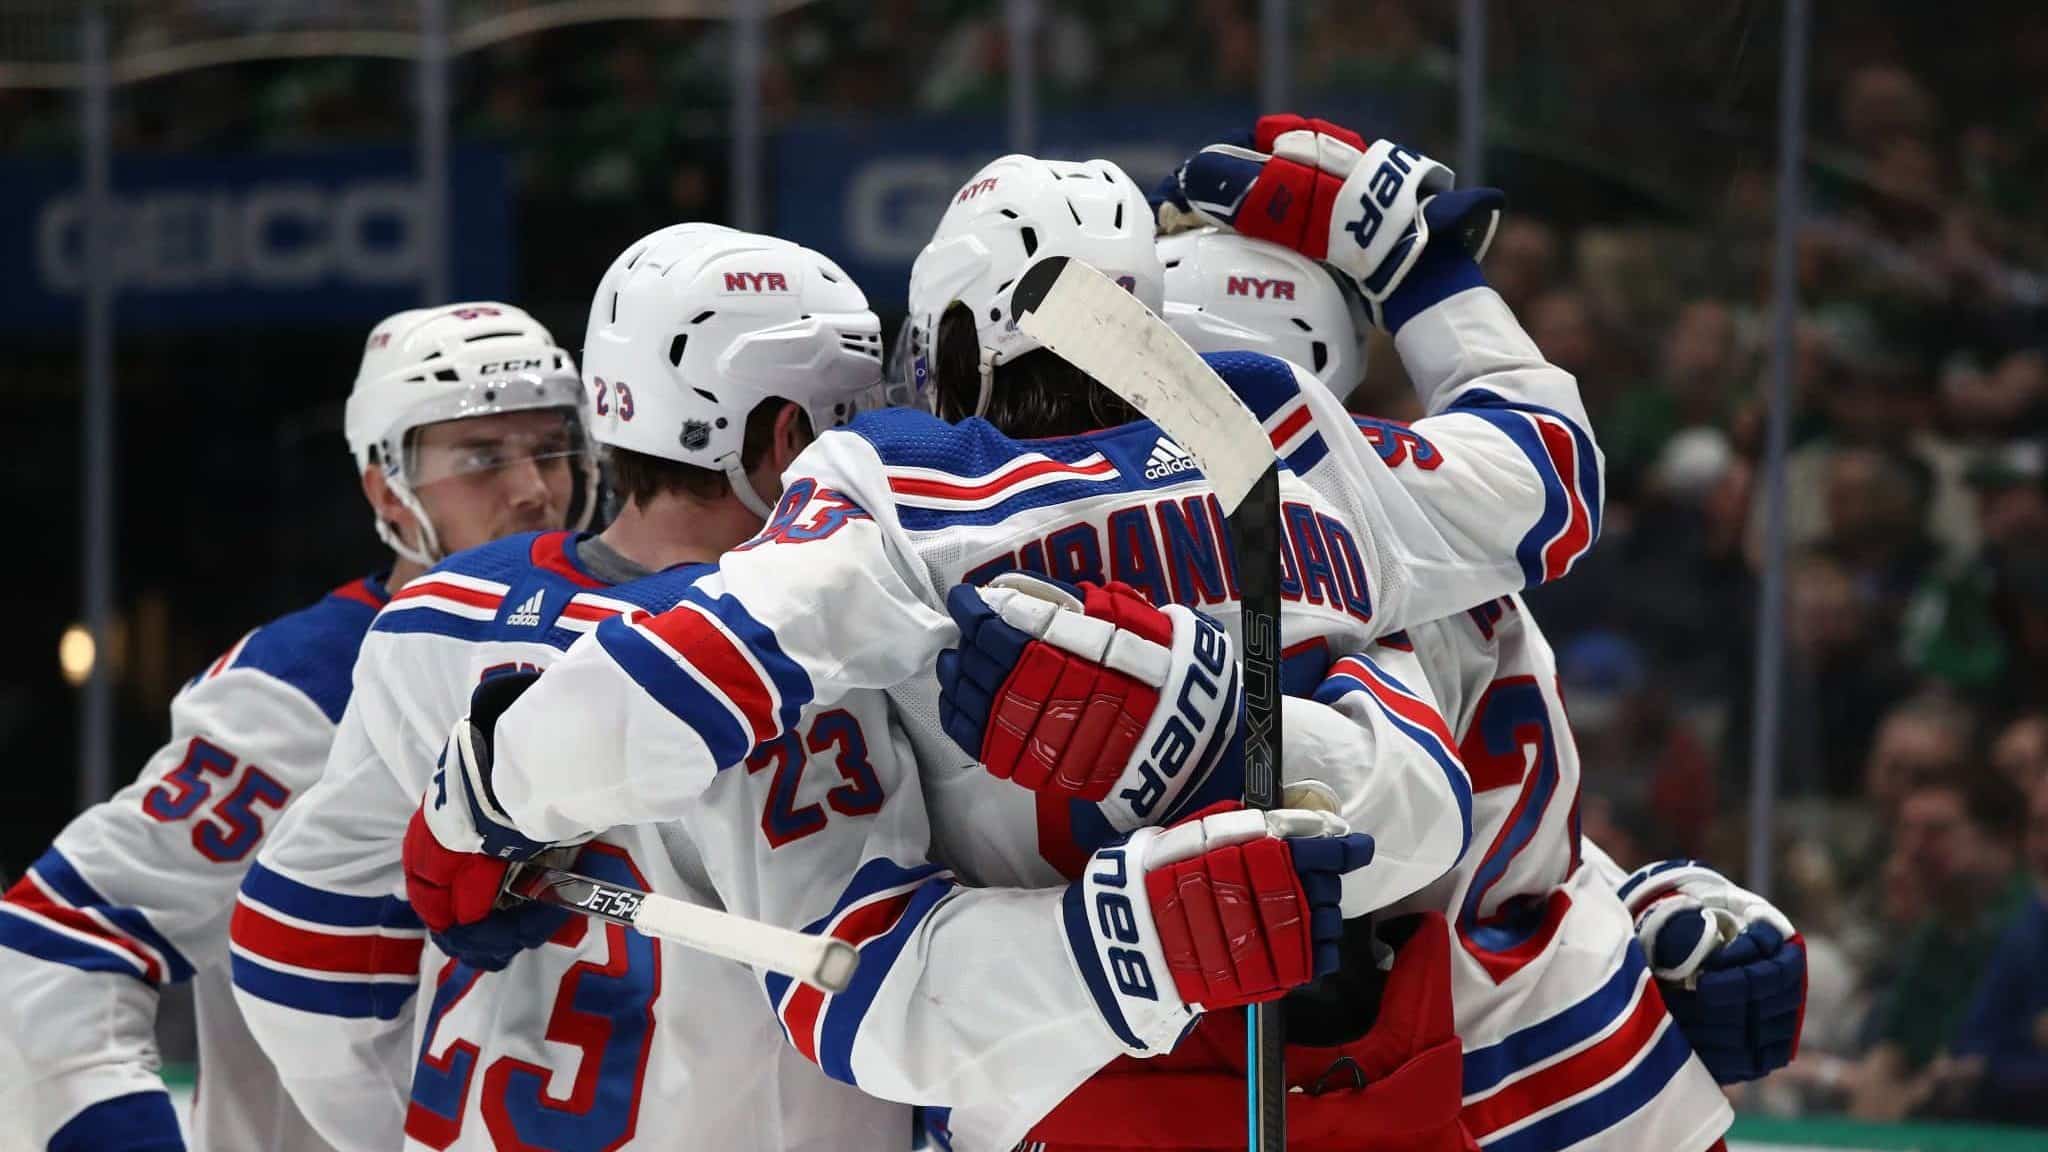 DALLAS, TEXAS - MARCH 10: The New York Rangers celebrate a goal by Kaapo Kakko #24 against the Dallas Stars during the second period at American Airlines Center on March 10, 2020 in Dallas, Texas.